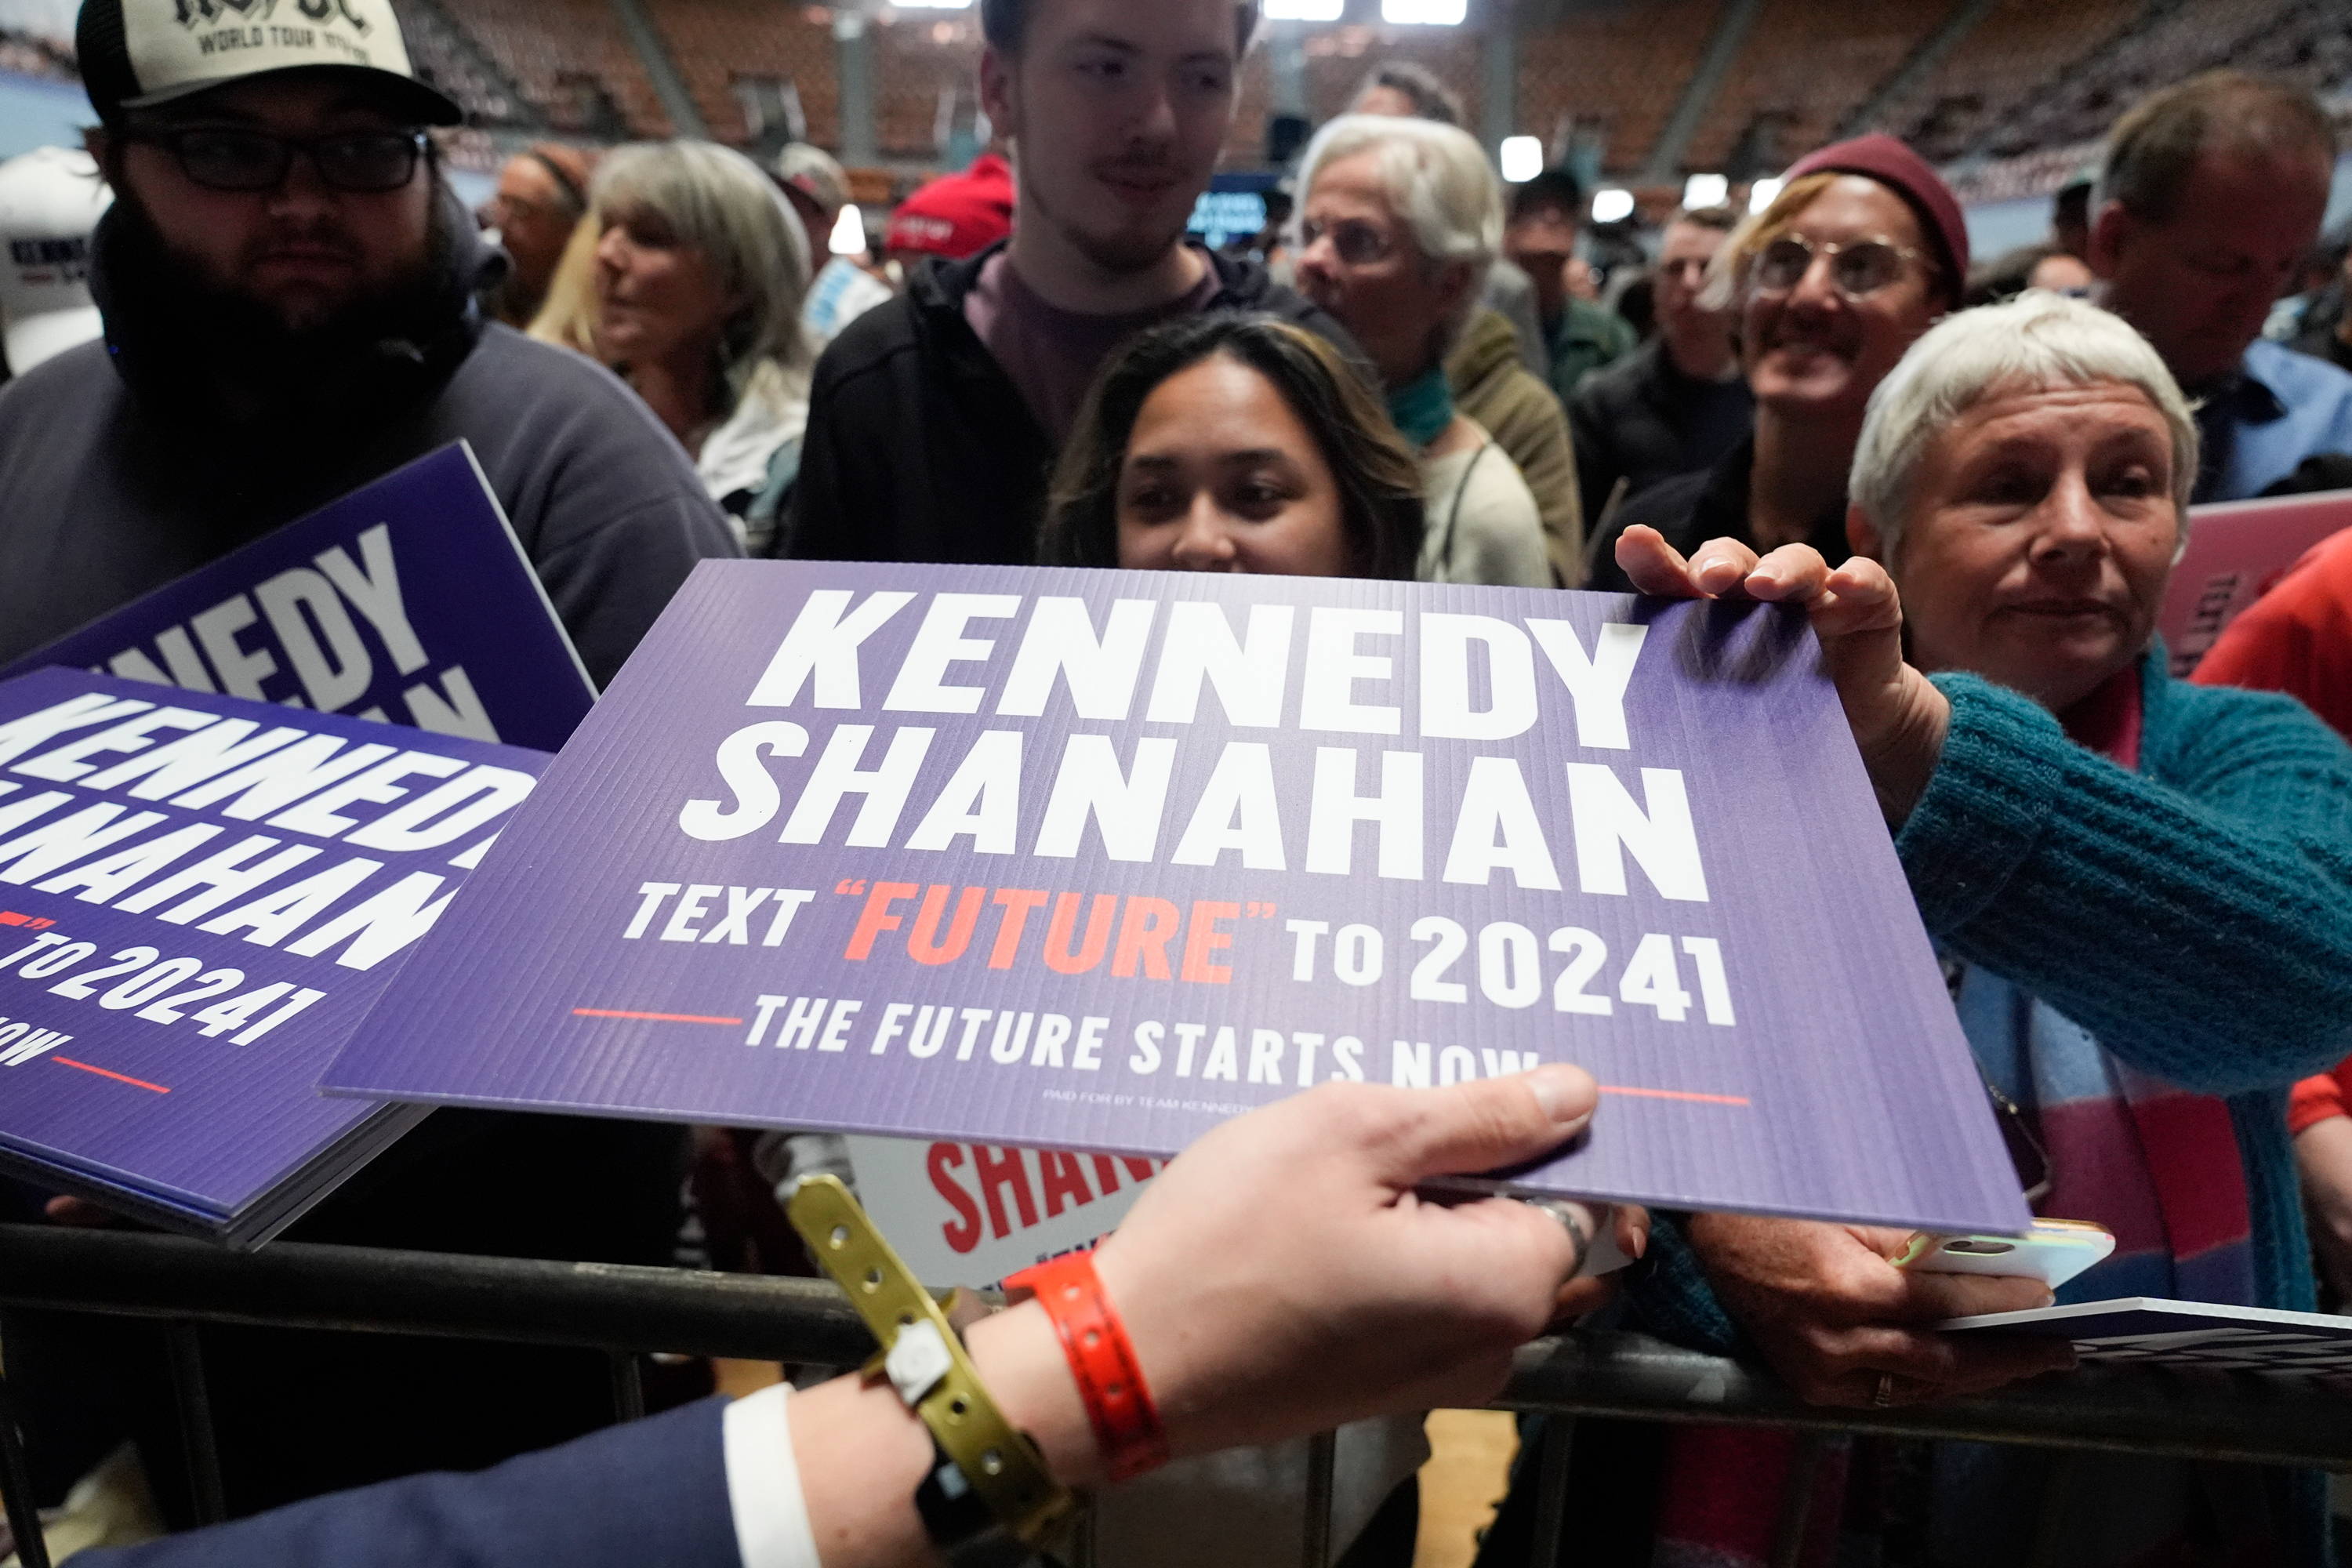 Supporters are handed signs during a campaign event for Presidential candidate Robert F. Kennedy Jr. in Oakland, California on March 26.